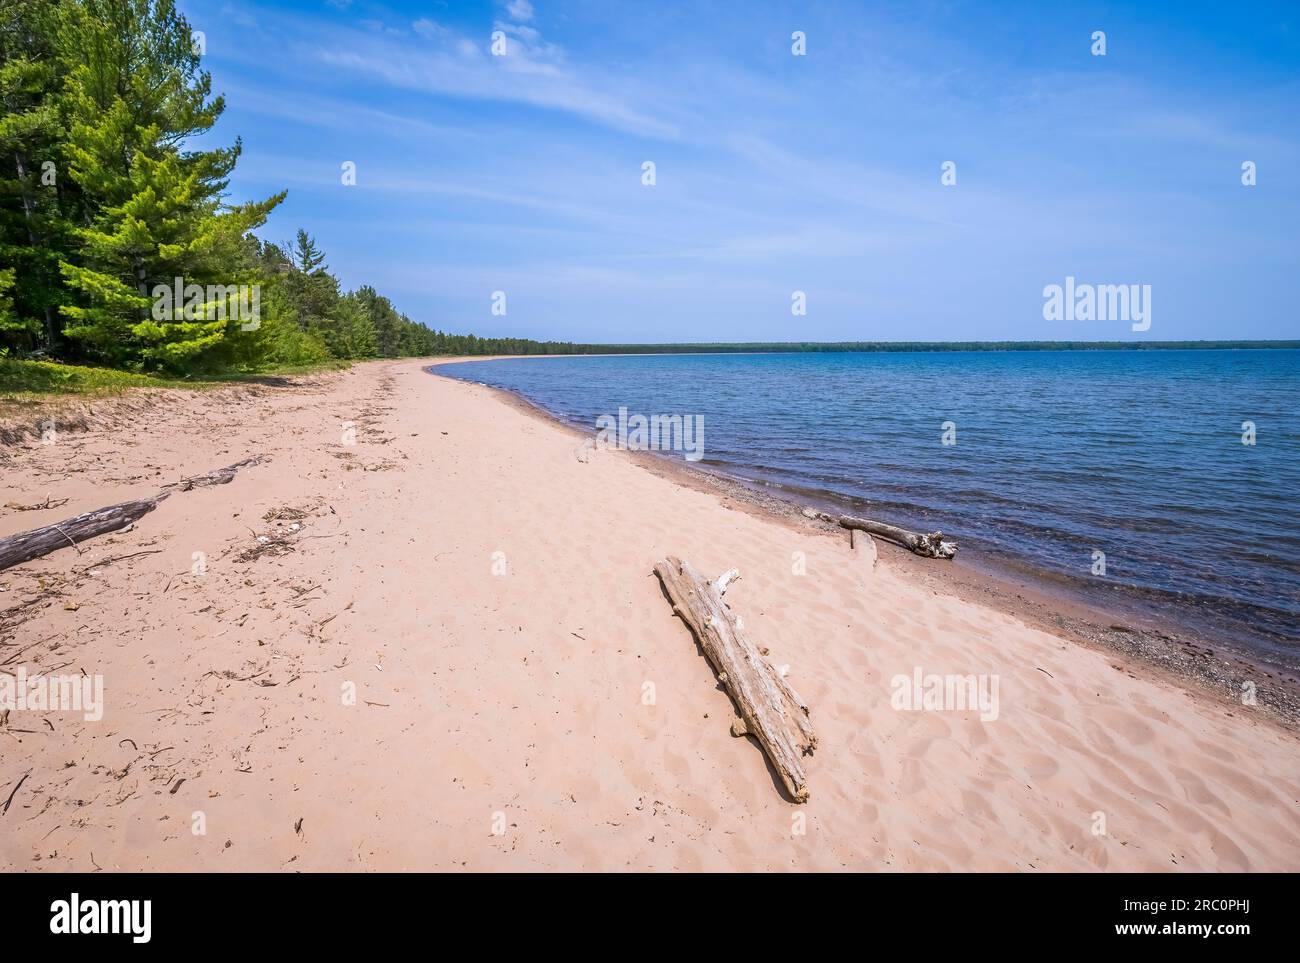 Lake Superior beach in Big Bay State Park on Madeline Island in the Apostle Islands National Lakeshore in Wisconsin USA Stock Photo